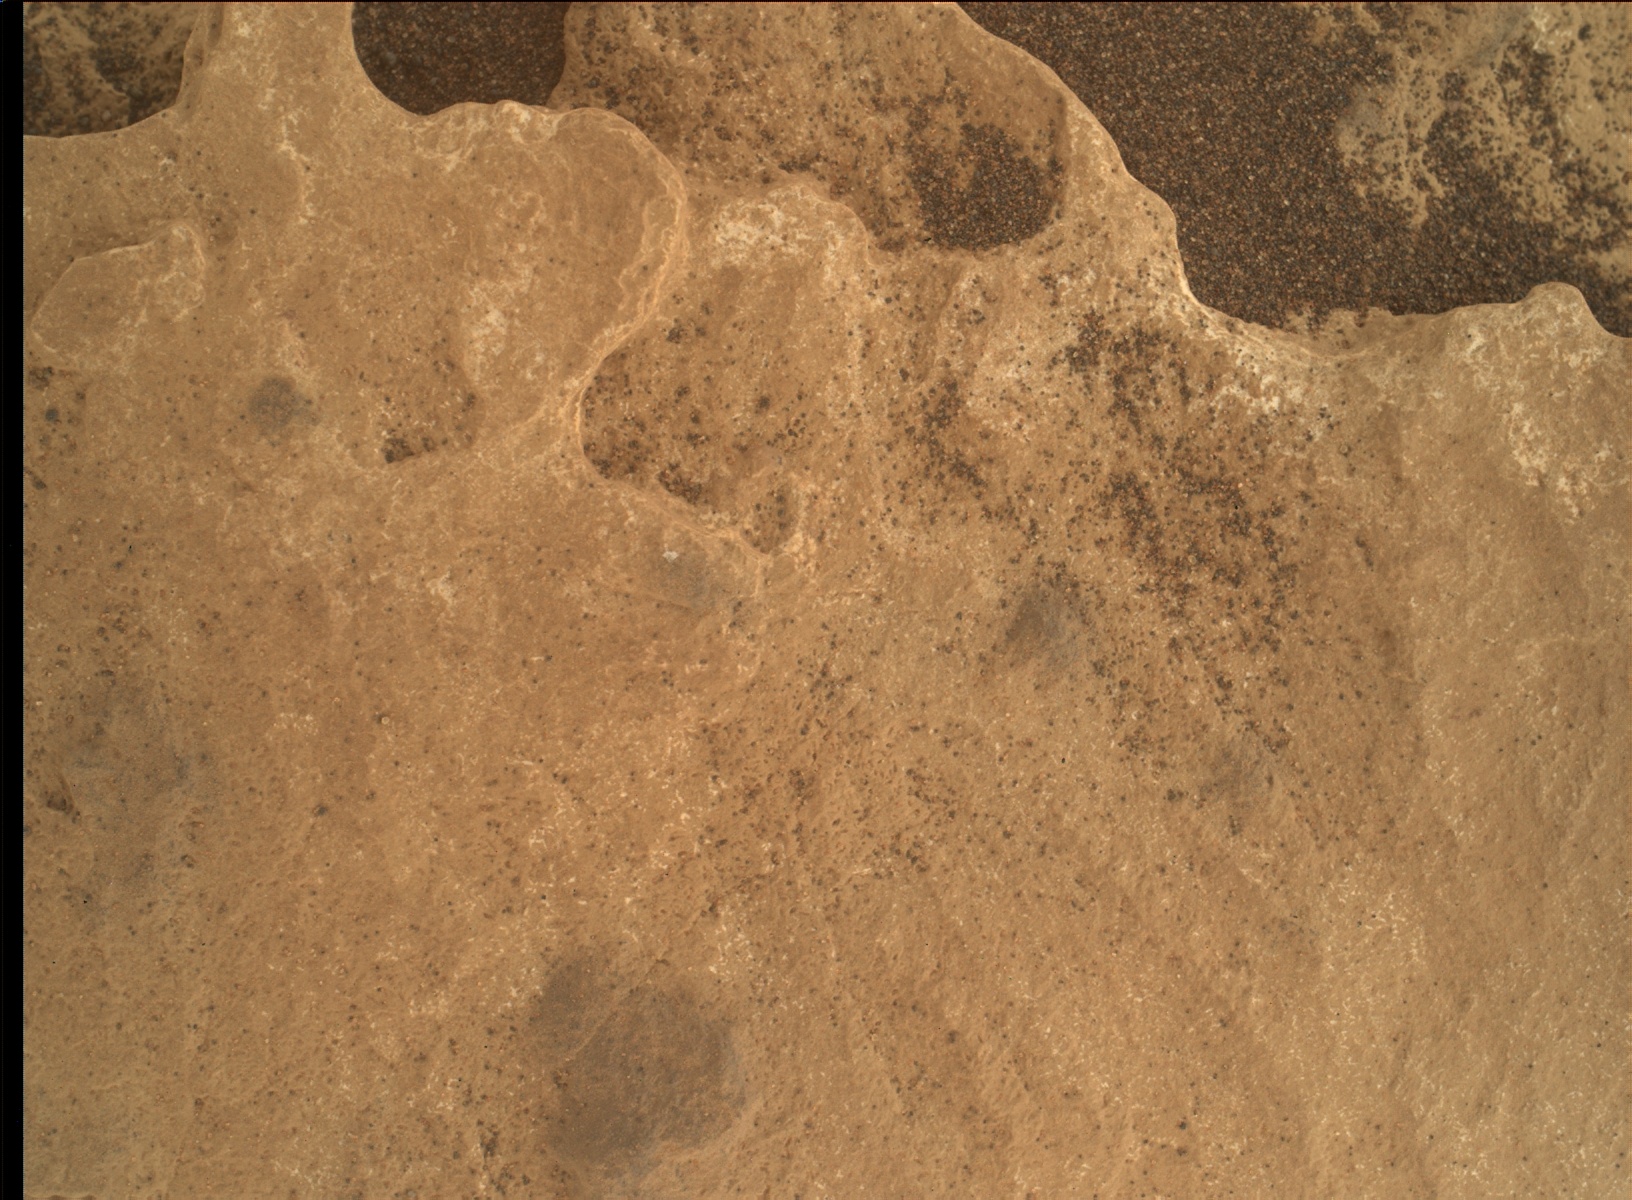 Nasa's Mars rover Curiosity acquired this image using its Mars Hand Lens Imager (MAHLI) on Sol 1679